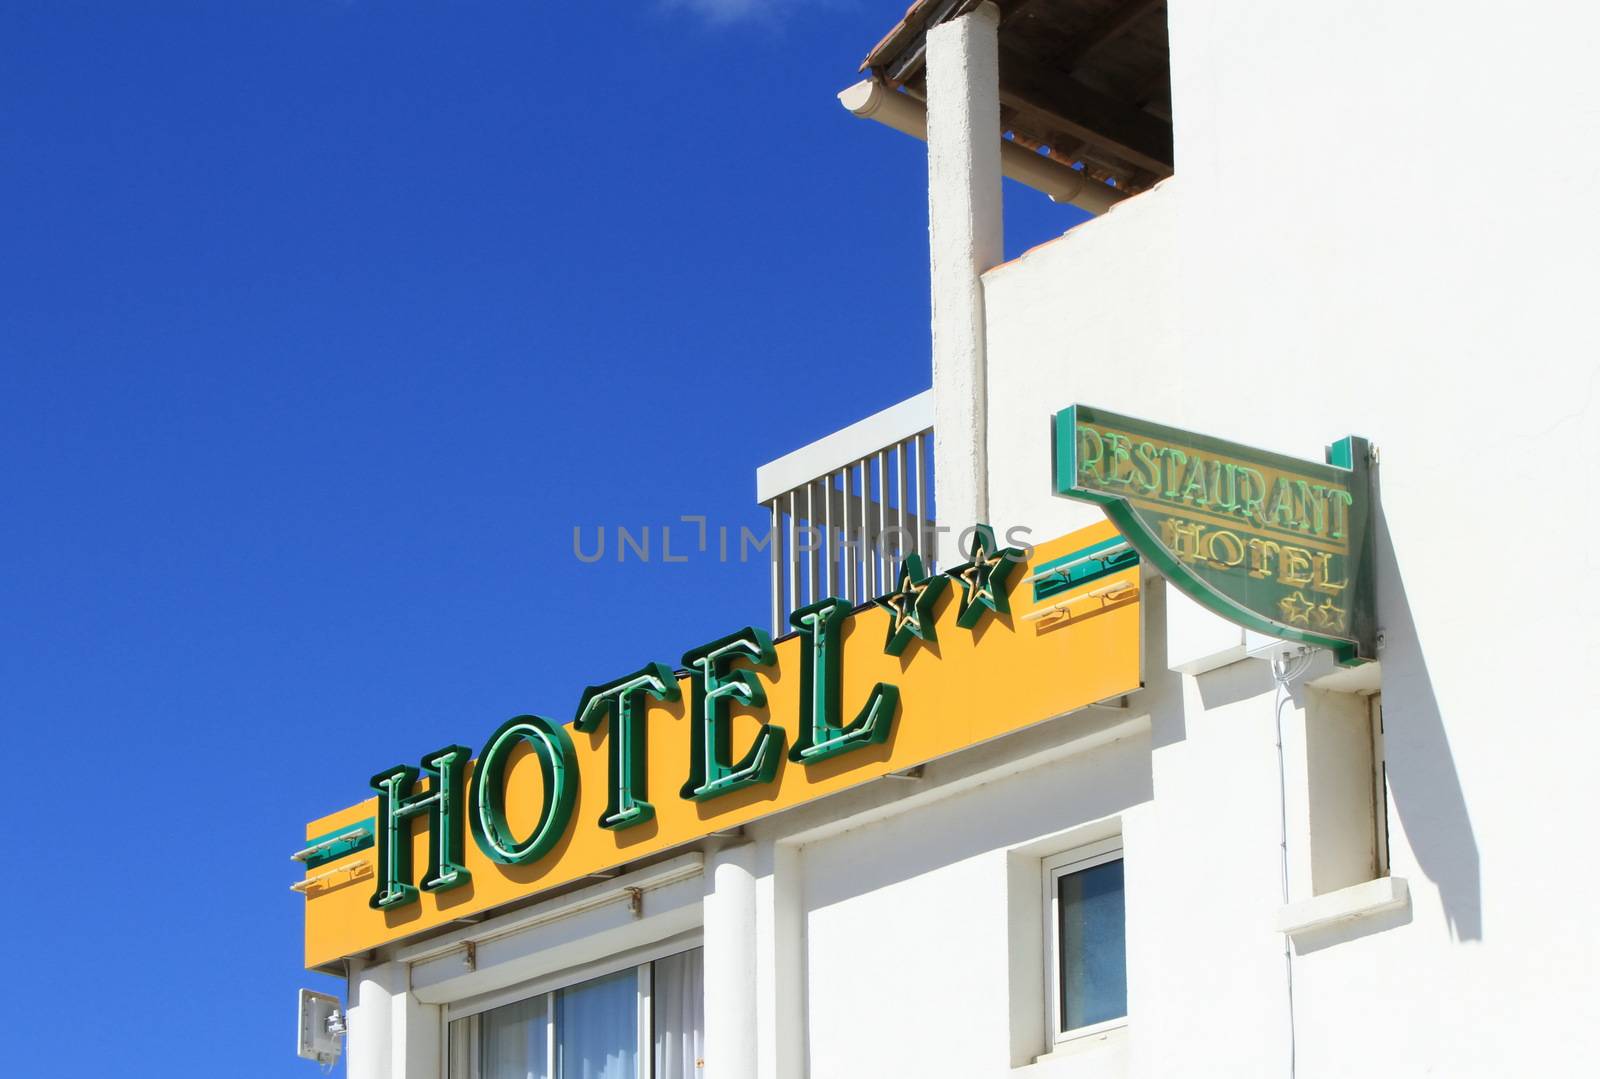 Small two stars hotel and restaurant signs on white building by beautiful day